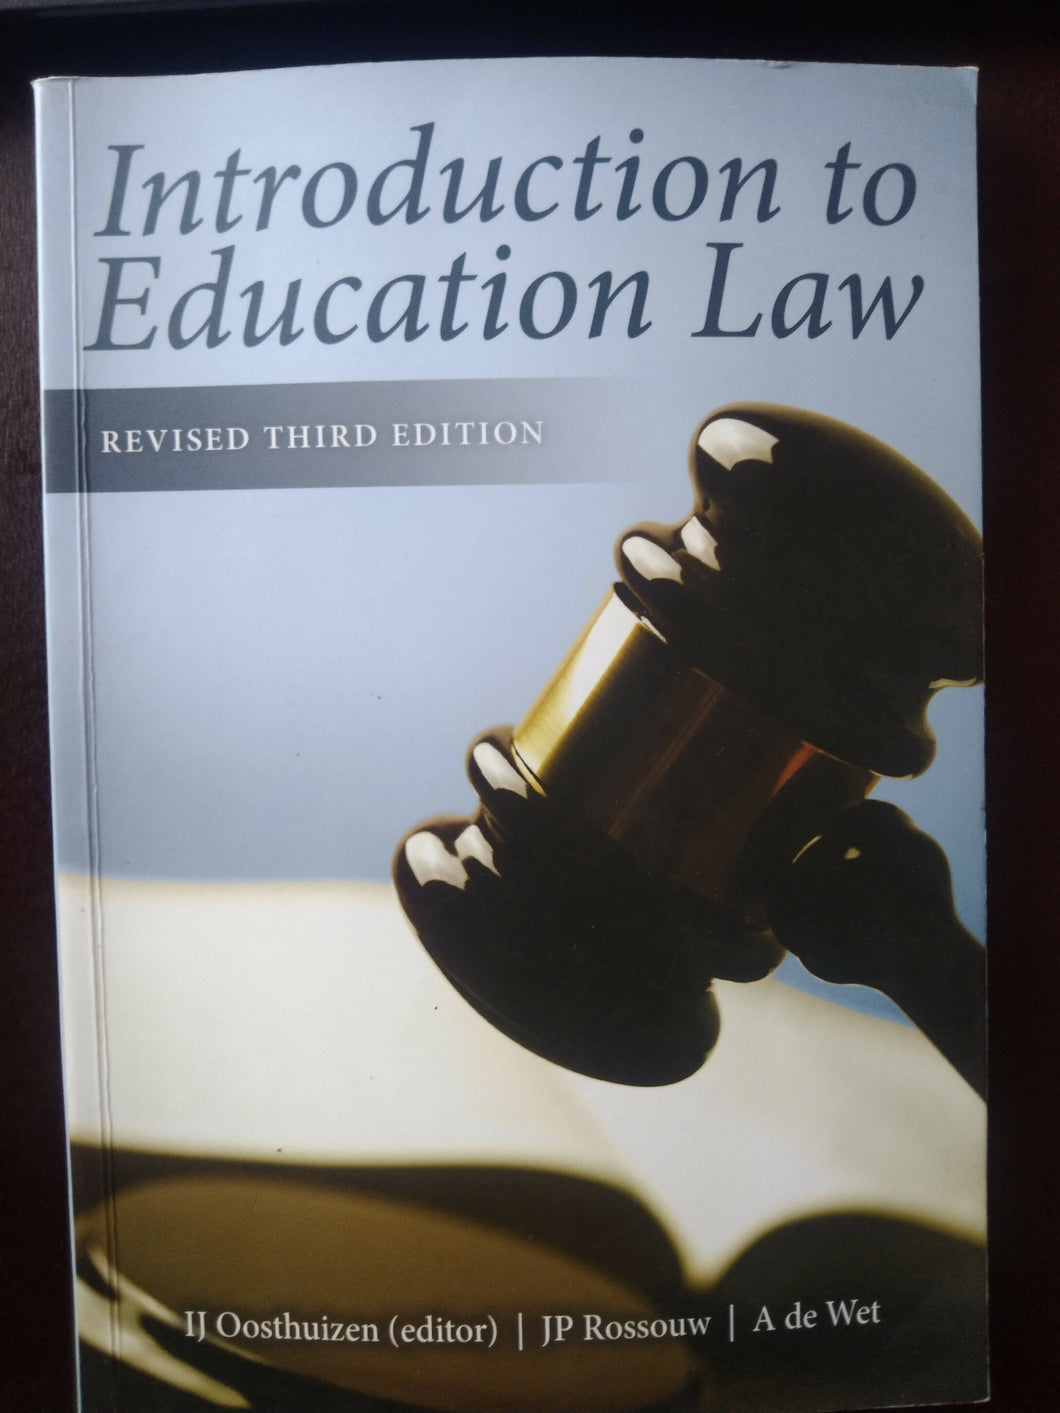 Introduction to Education Law Revised Third Edition